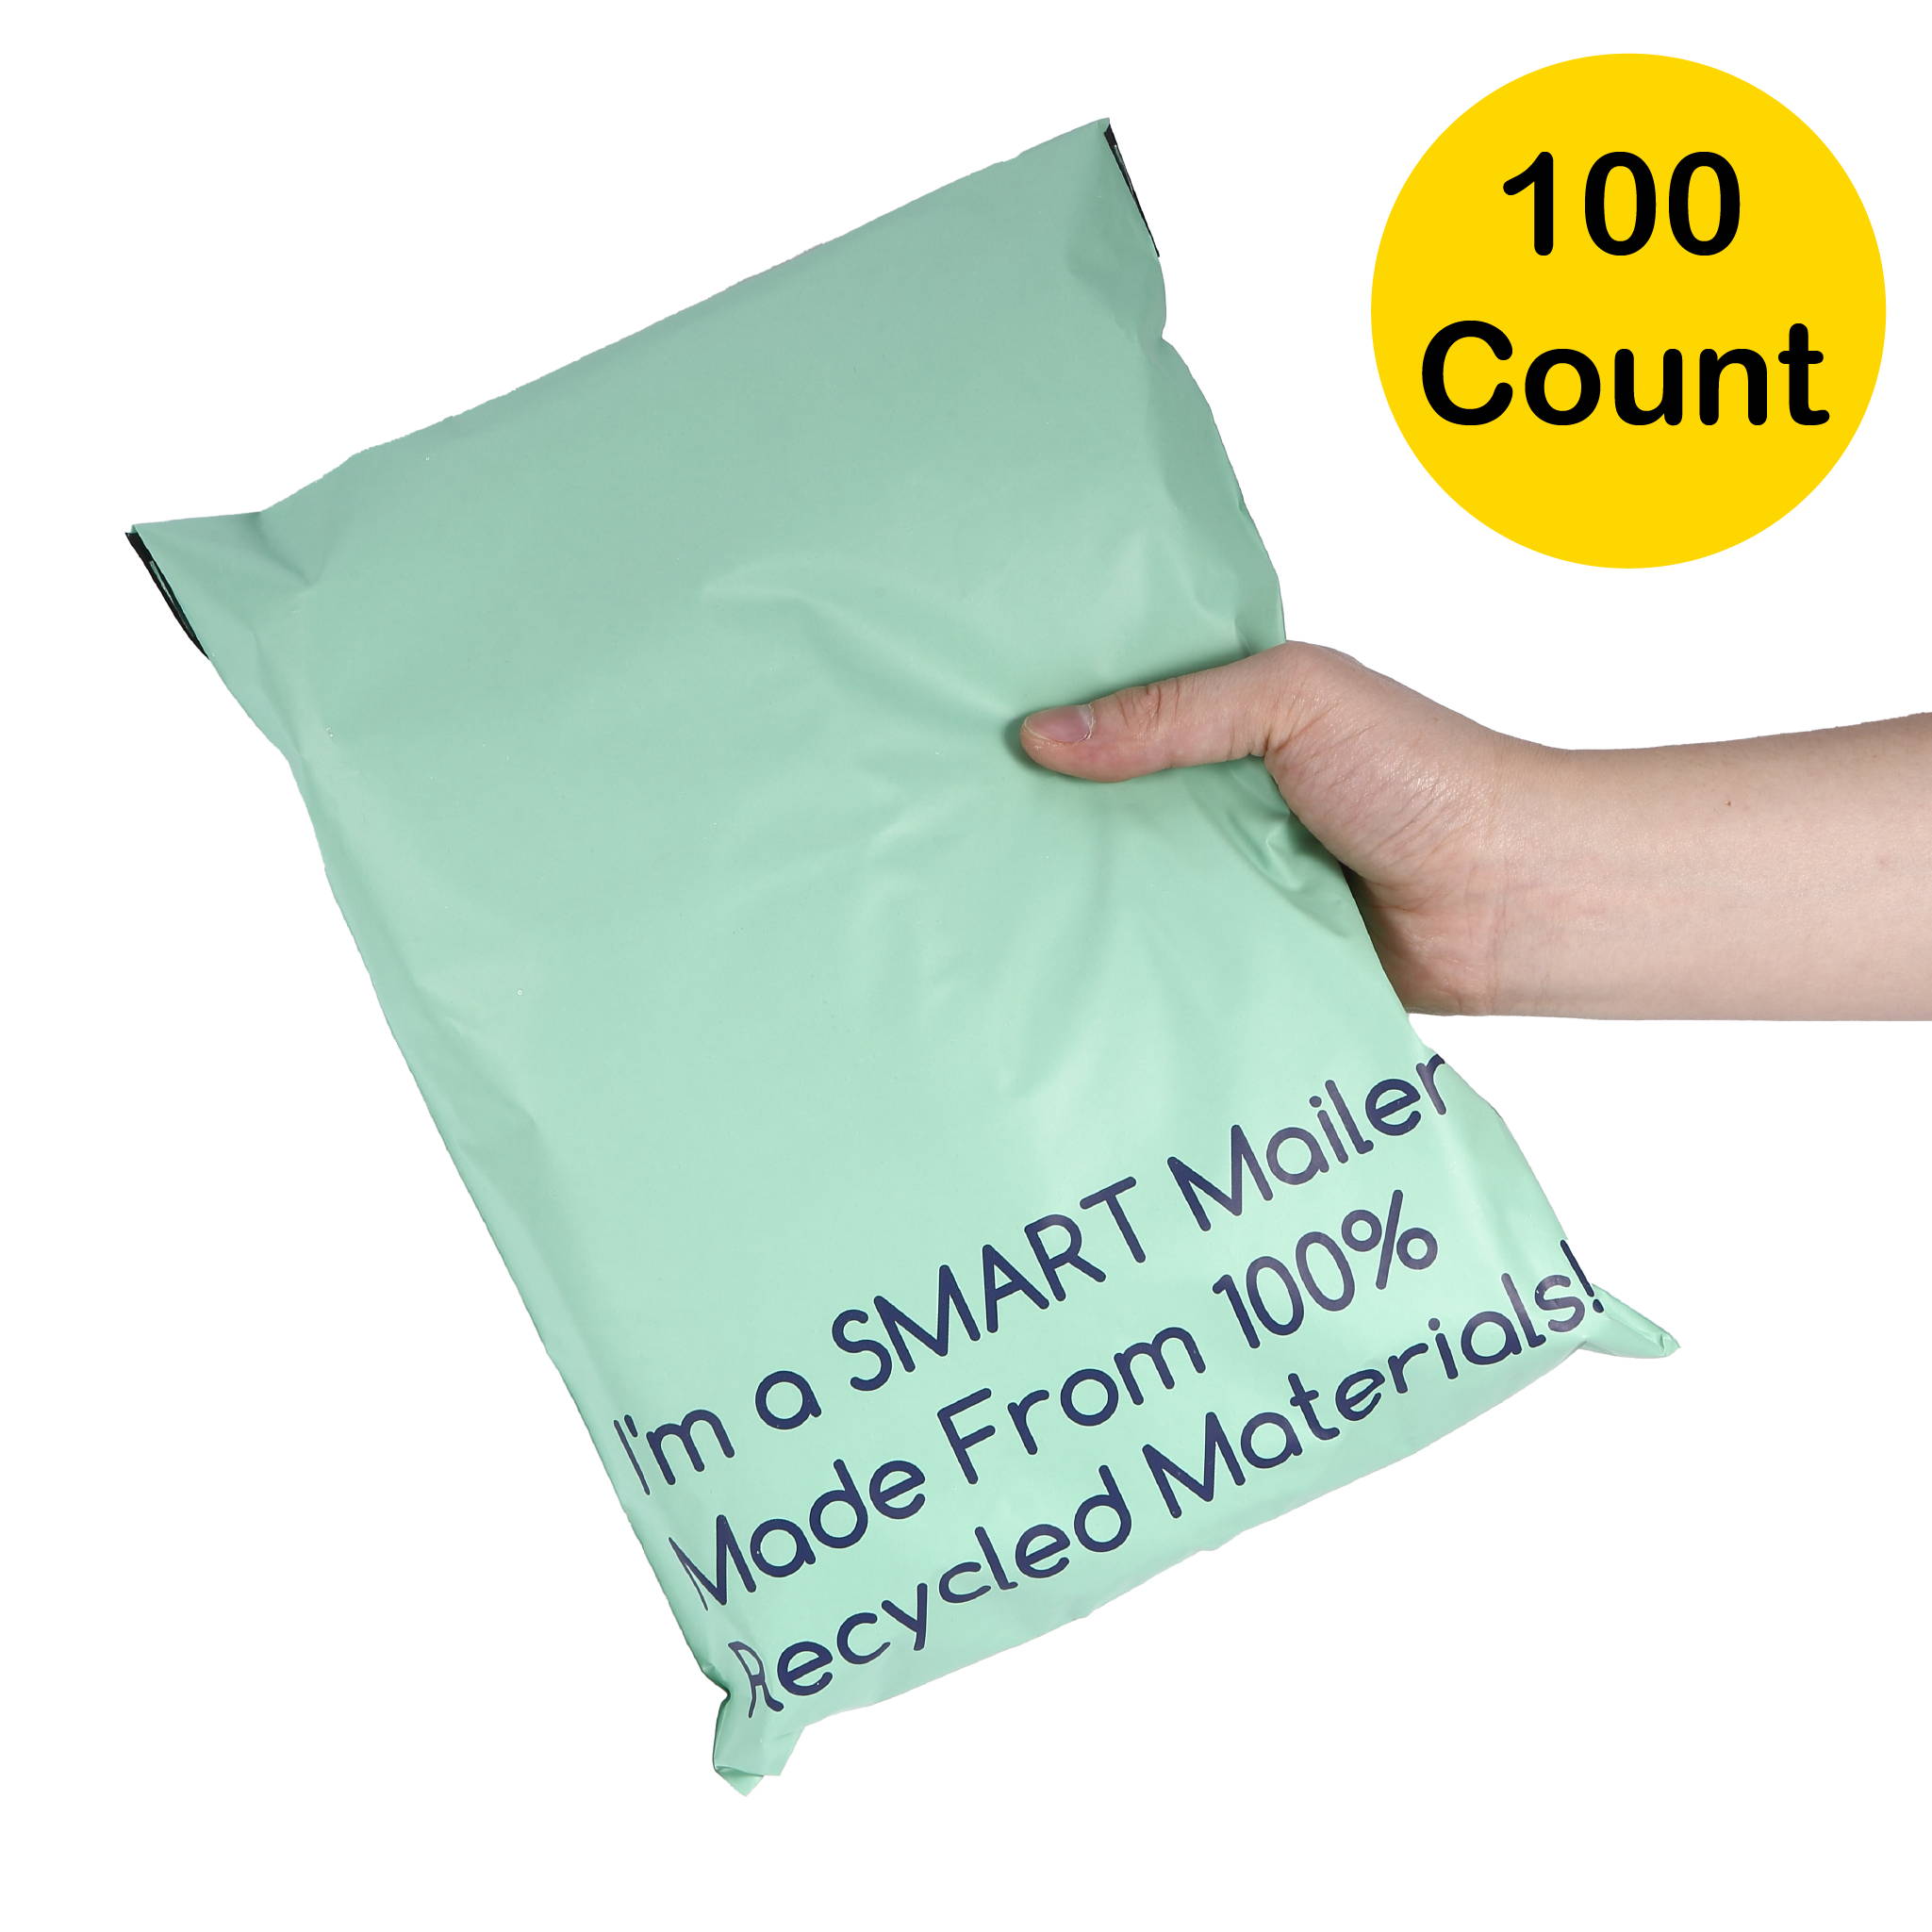 Eco-Friendly Poly Mailer Envelopes by Sensible Mailers� 100% Recycled Material 